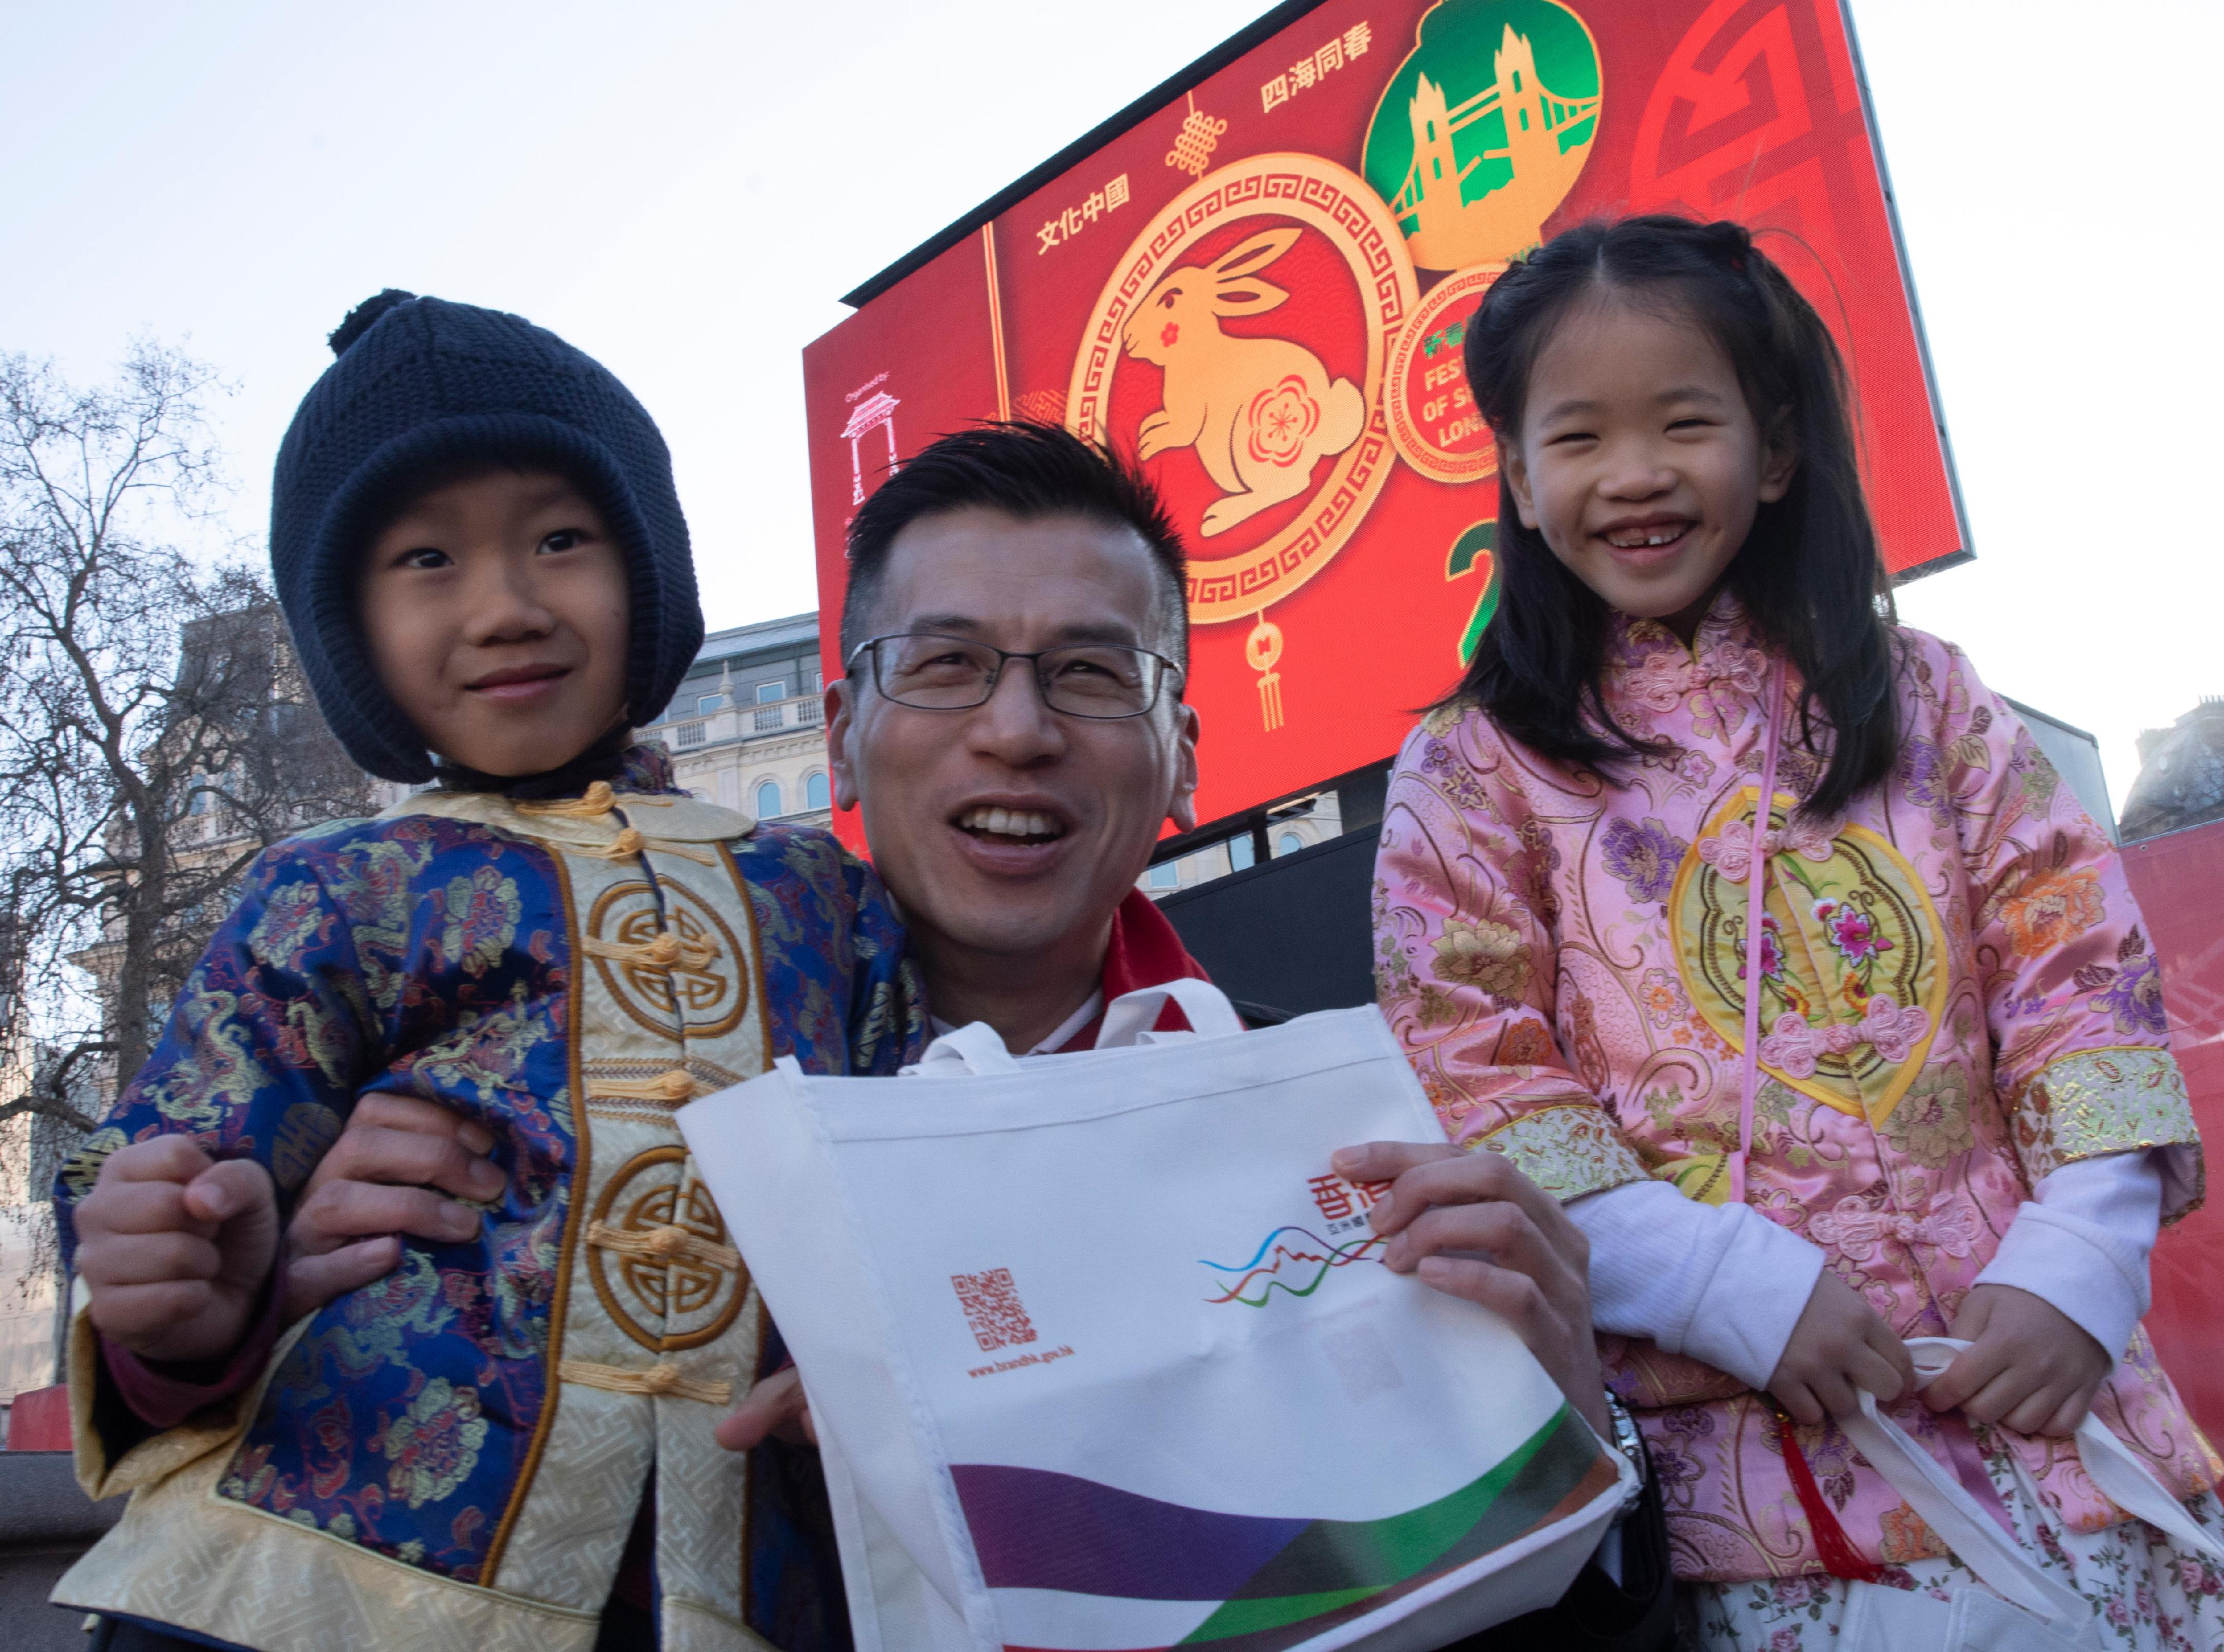 The Hong Kong Economic and Trade Office, London (London ETO) participated in a large-scale London Chinatown celebration in Trafalgar Square, Chinatown and Charing Cross Road on January 22 (London time). Photo shows the Director-General of the London ETO, Mr Gilford Law (centre), greeting local audience with souvenirs at Trafalgar Square.